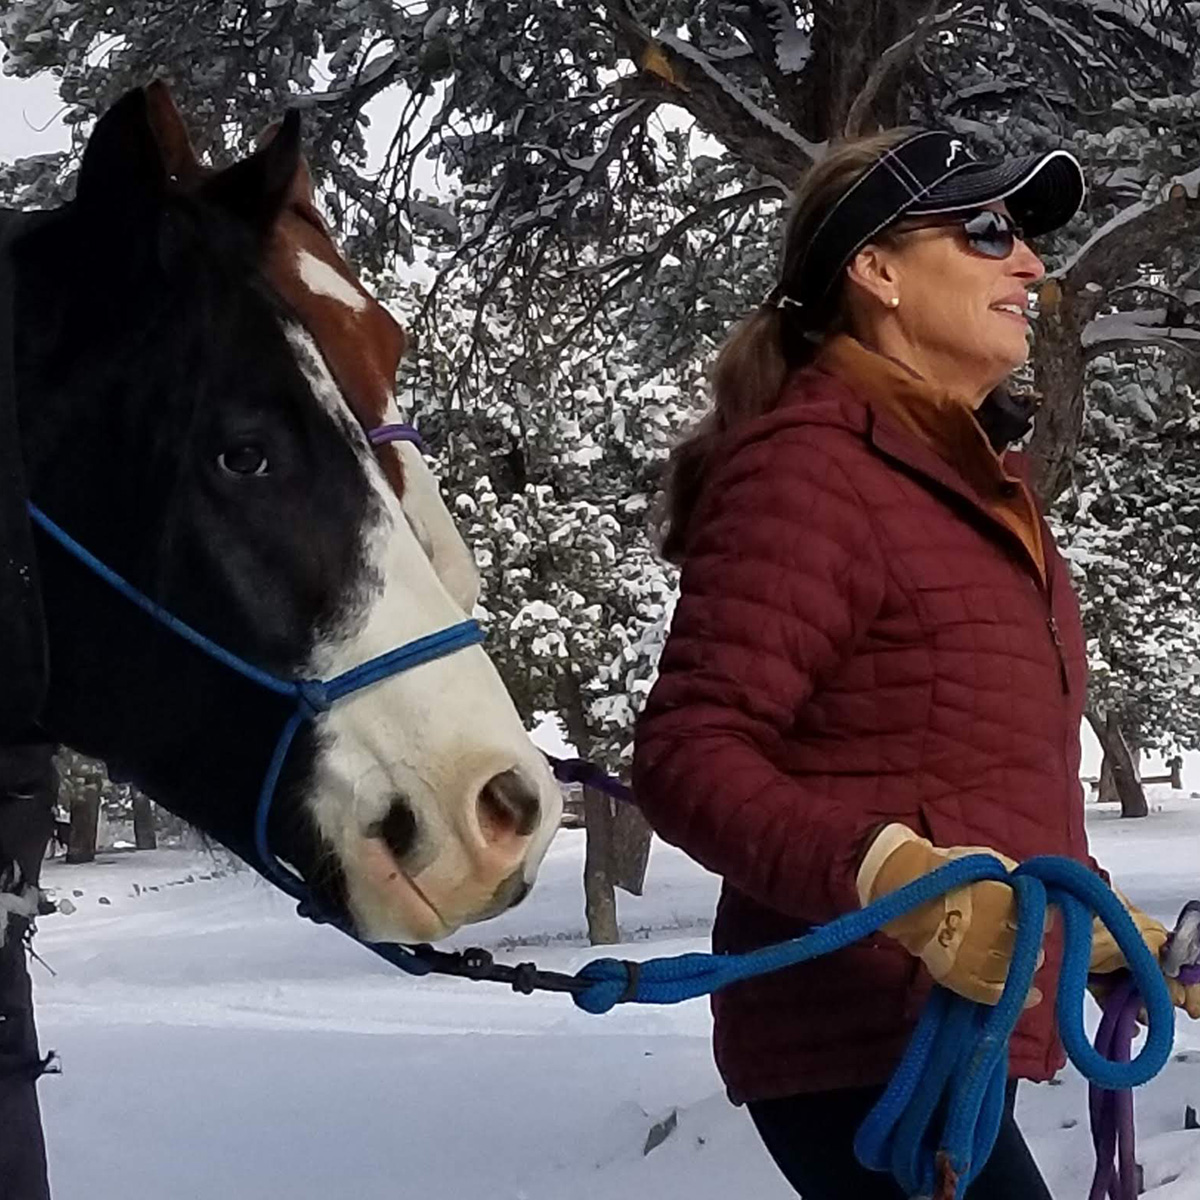 Julie Goodnight leads two horses on a snowy day